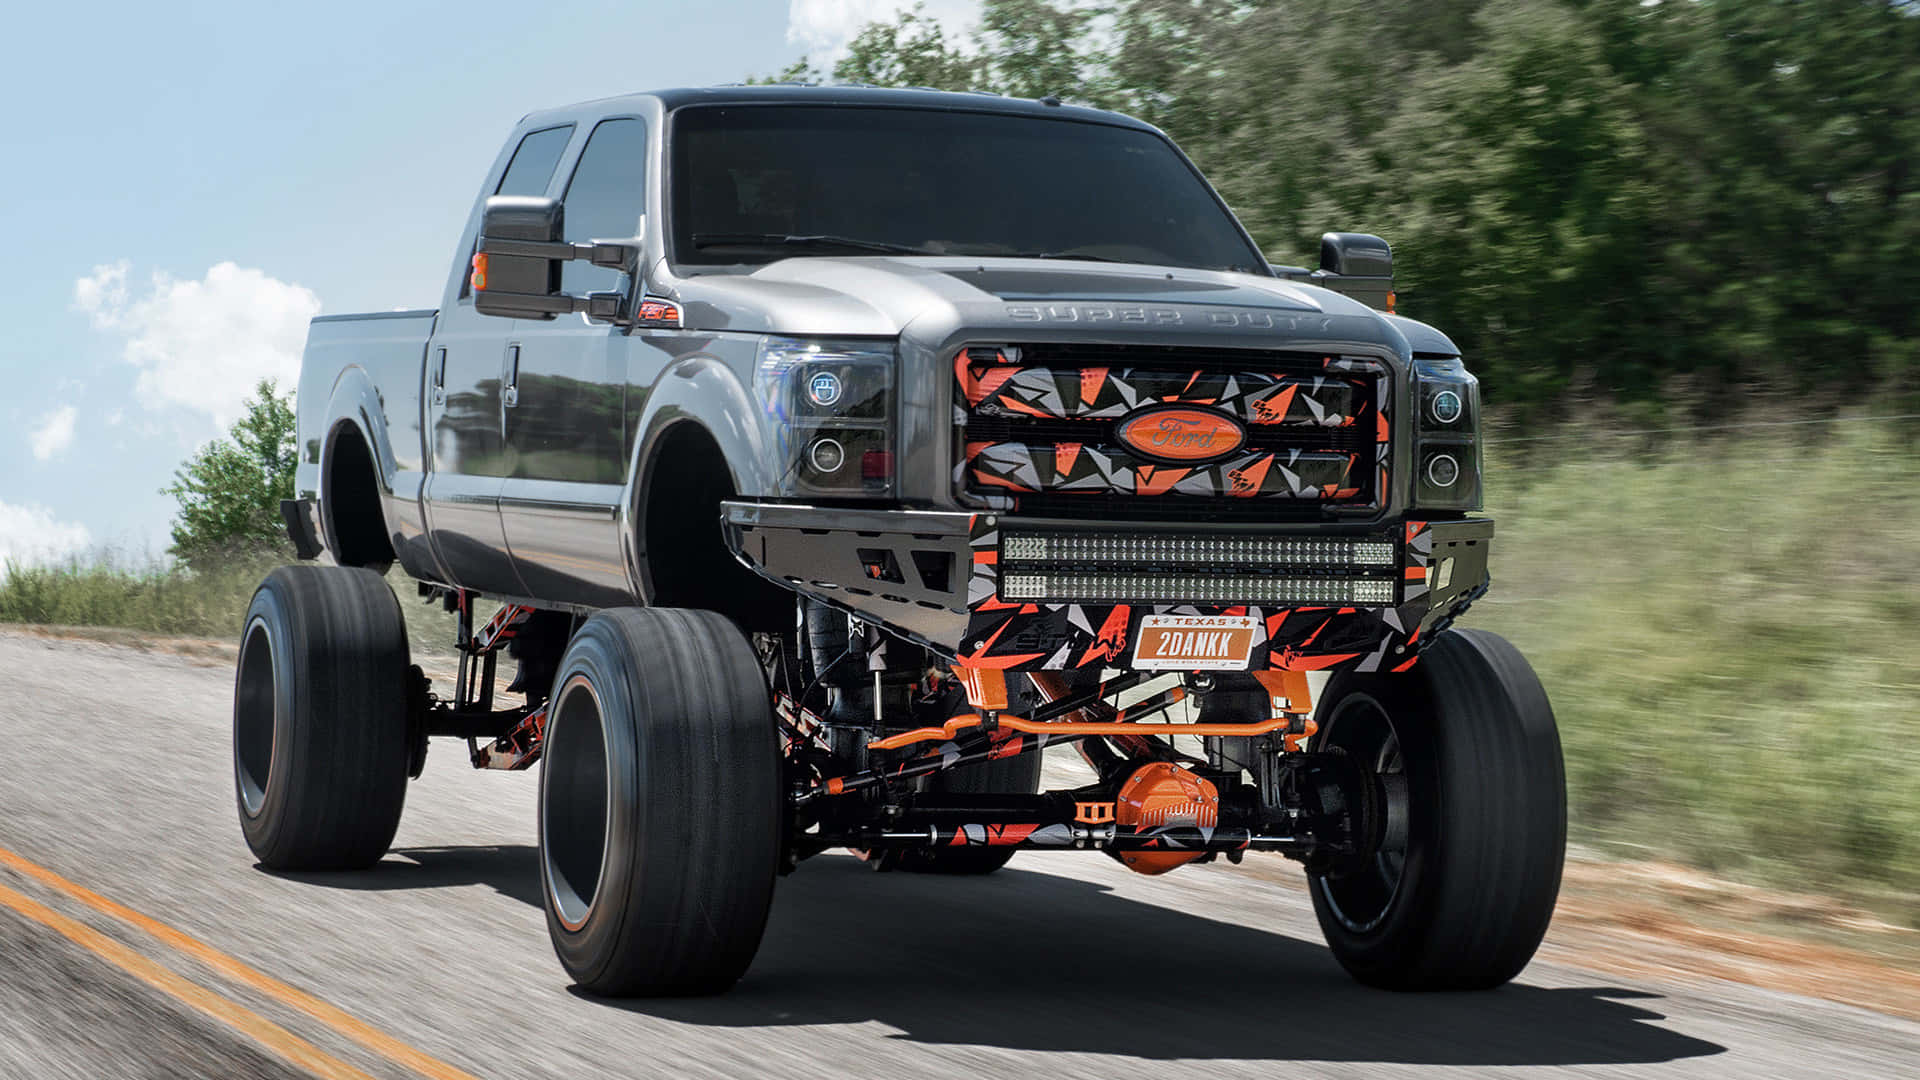 "Enhancing Your Performance with the Ford Powerstroke" Wallpaper